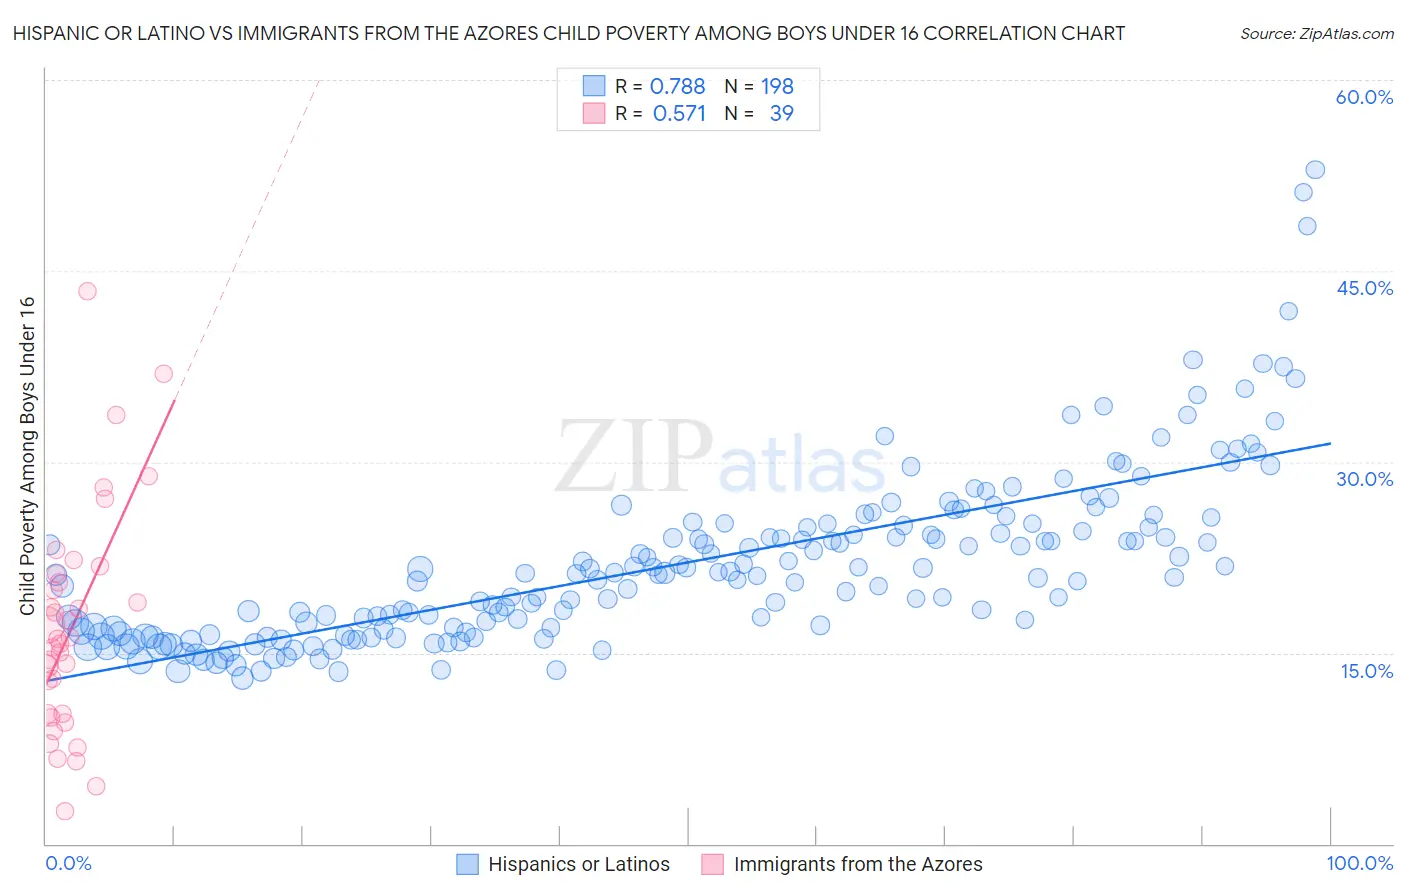 Hispanic or Latino vs Immigrants from the Azores Child Poverty Among Boys Under 16